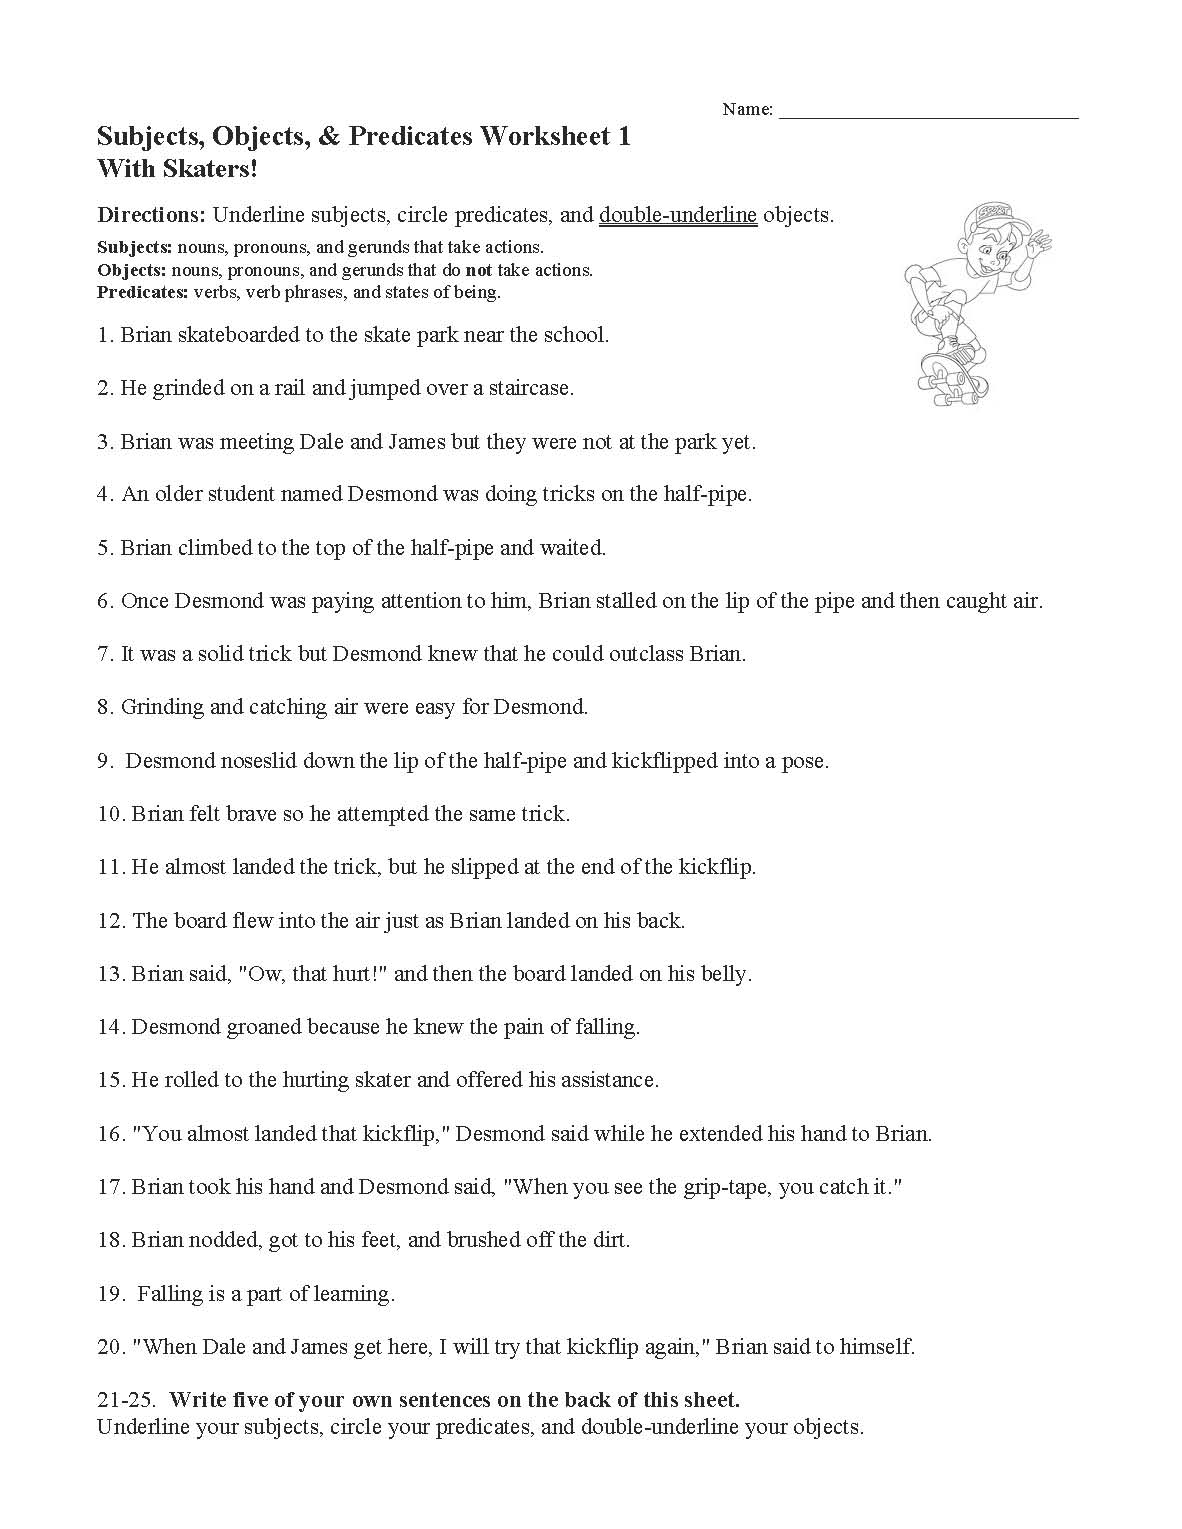 subjects-objects-and-predicates-with-skaters-worksheet-sentence